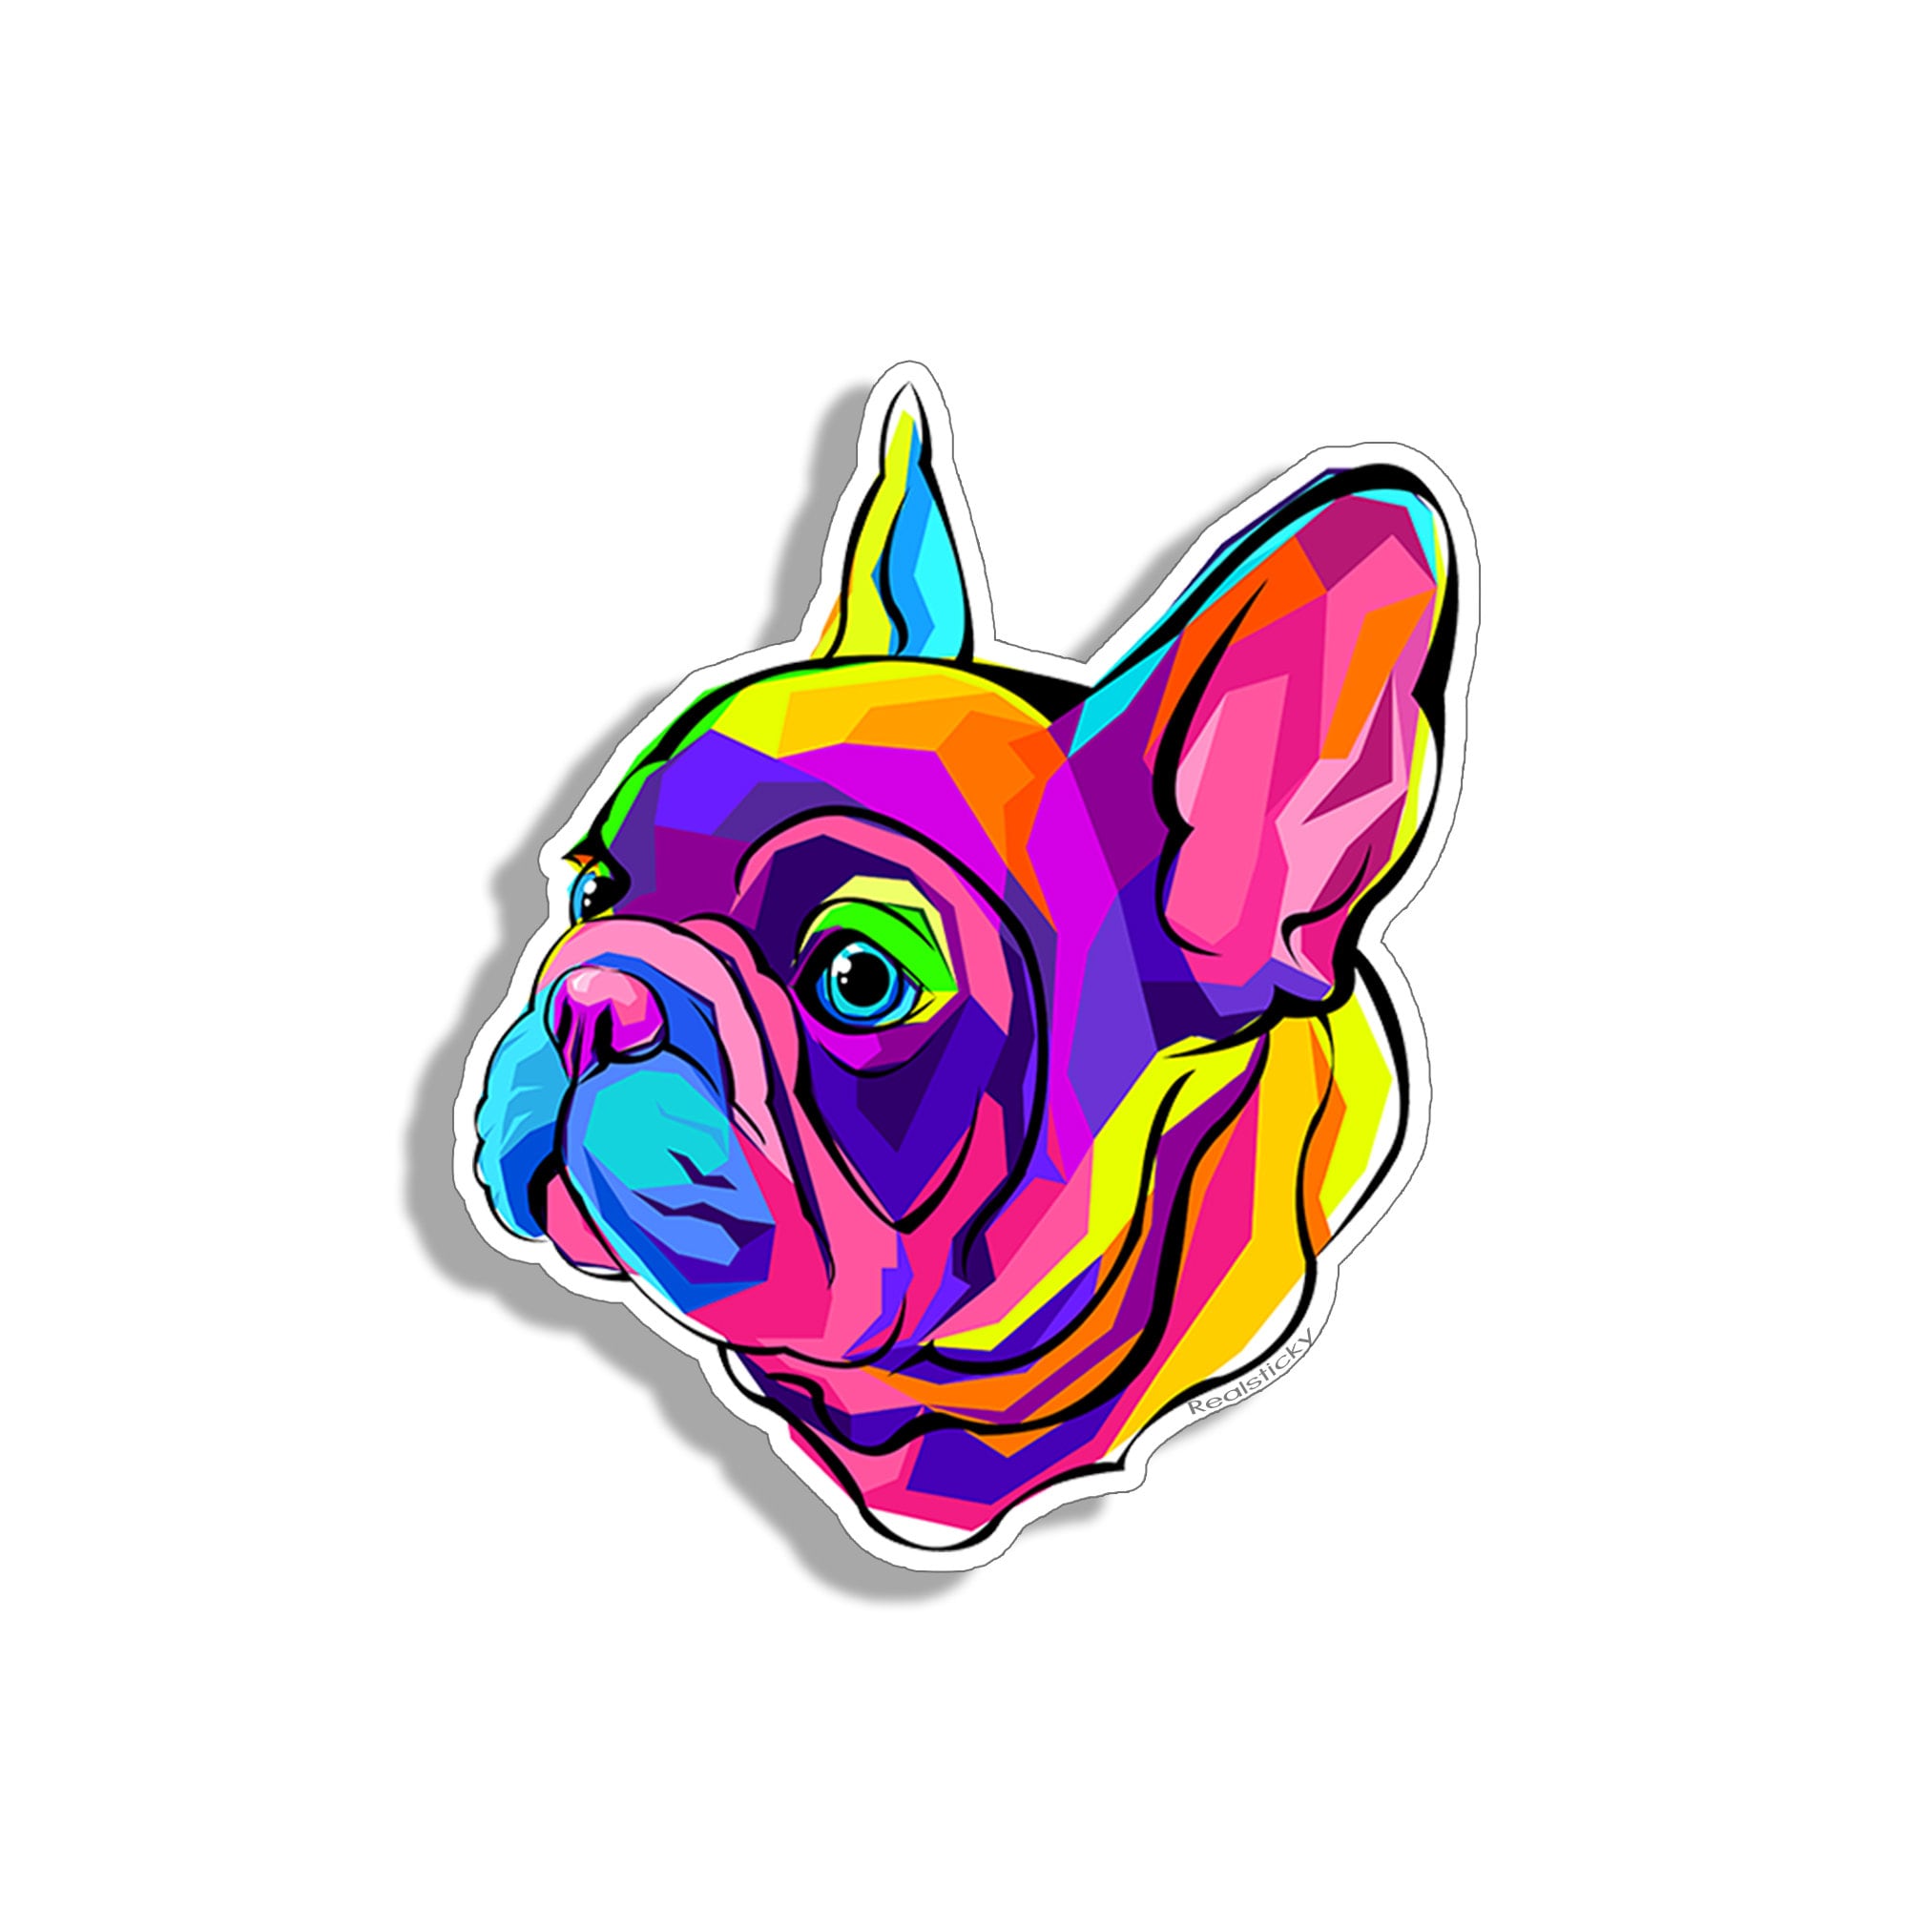 Frenchie French Bulldog Decal Window Bumper Sticker Car Dog Breed Love Pet Dogs 